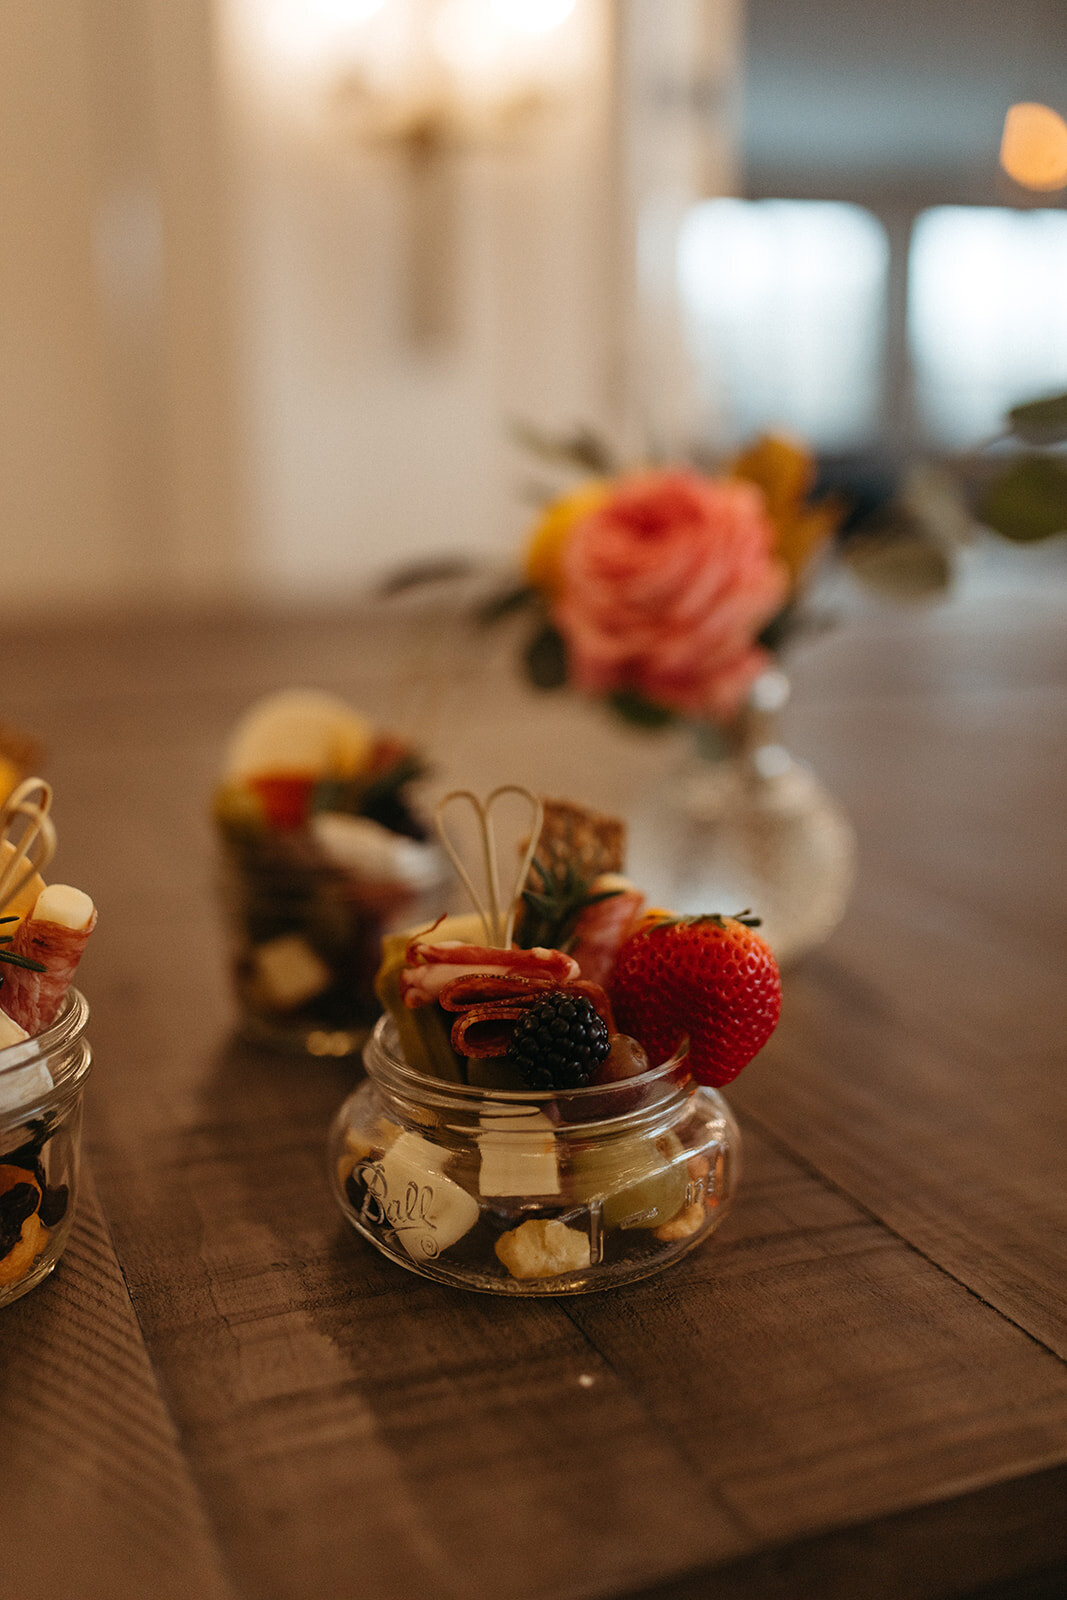 Charcuterie hors d’oeuvres in glass atop a wooden table with a rose in small vase.